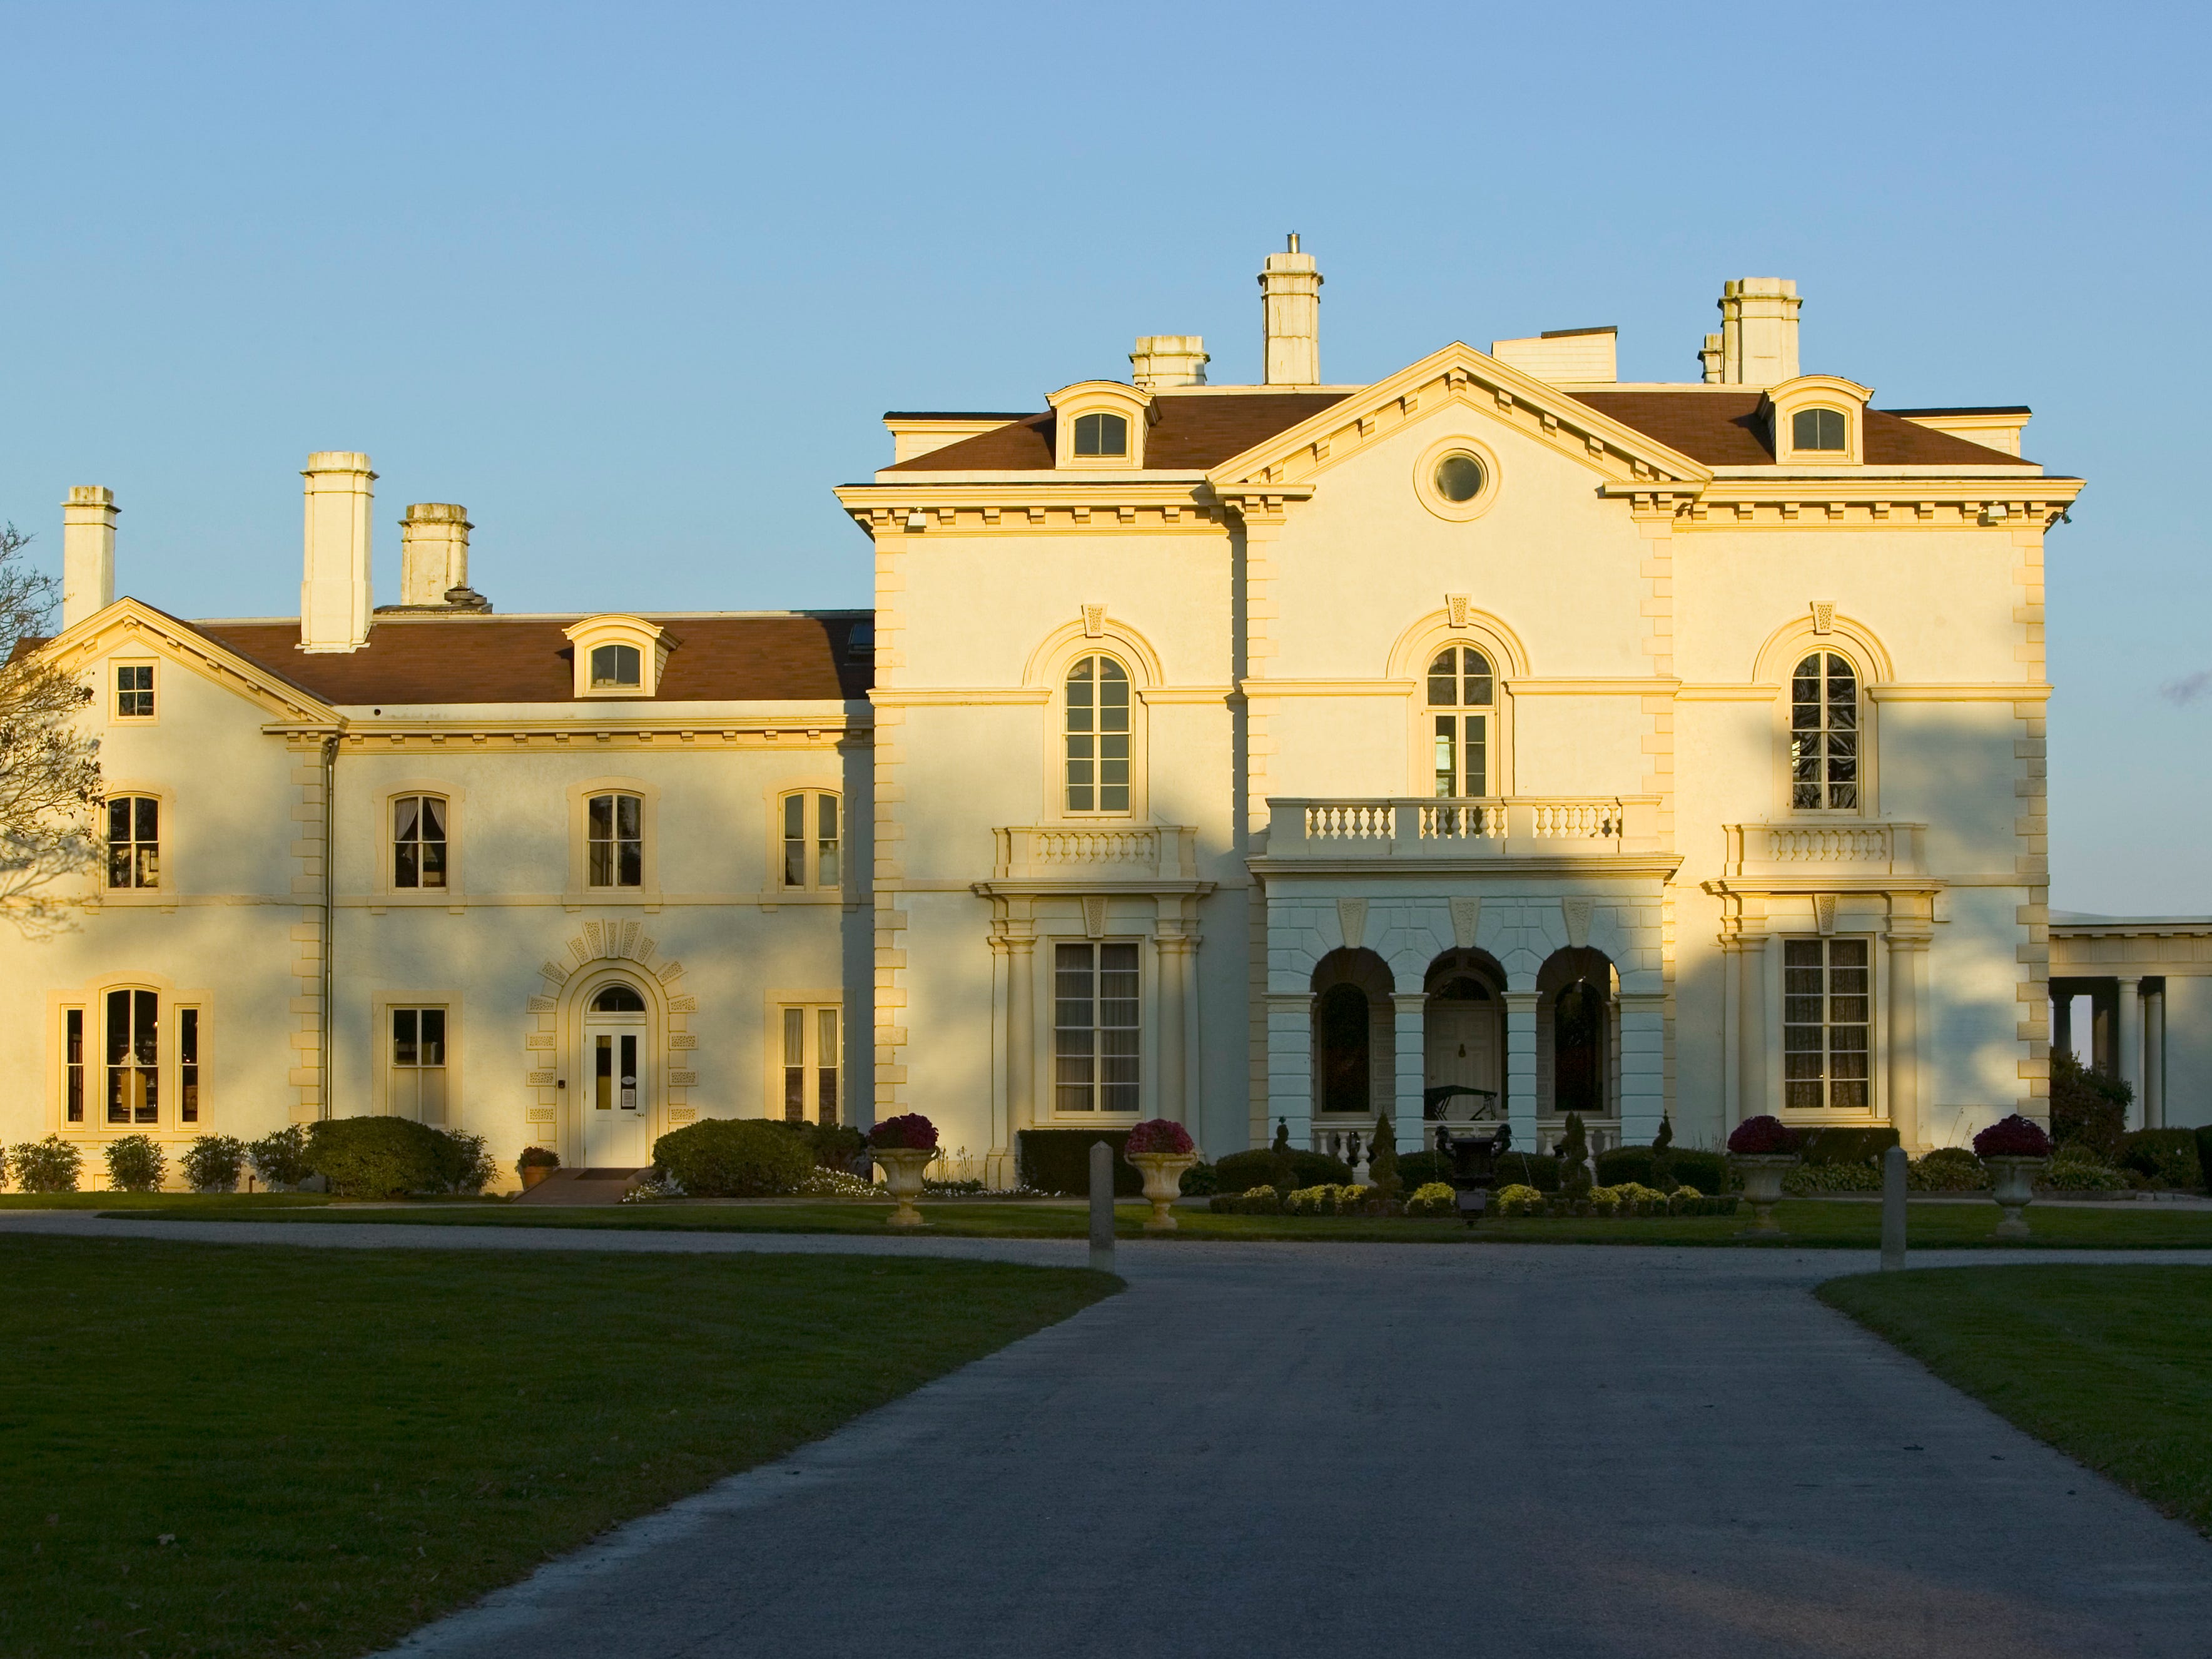 <p>Ellison reportedly owns the Astor Beechwood Mansion in Newport, Rhode Island, and a home in Malibu. Ellison also has houses in Palm Beach, Florida and more in a<a href="https://www.businessinsider.com/larry-ellison-florida-estate-deal-details-2022-6"> multibillion-dollar real estate portfolio.</a></p>